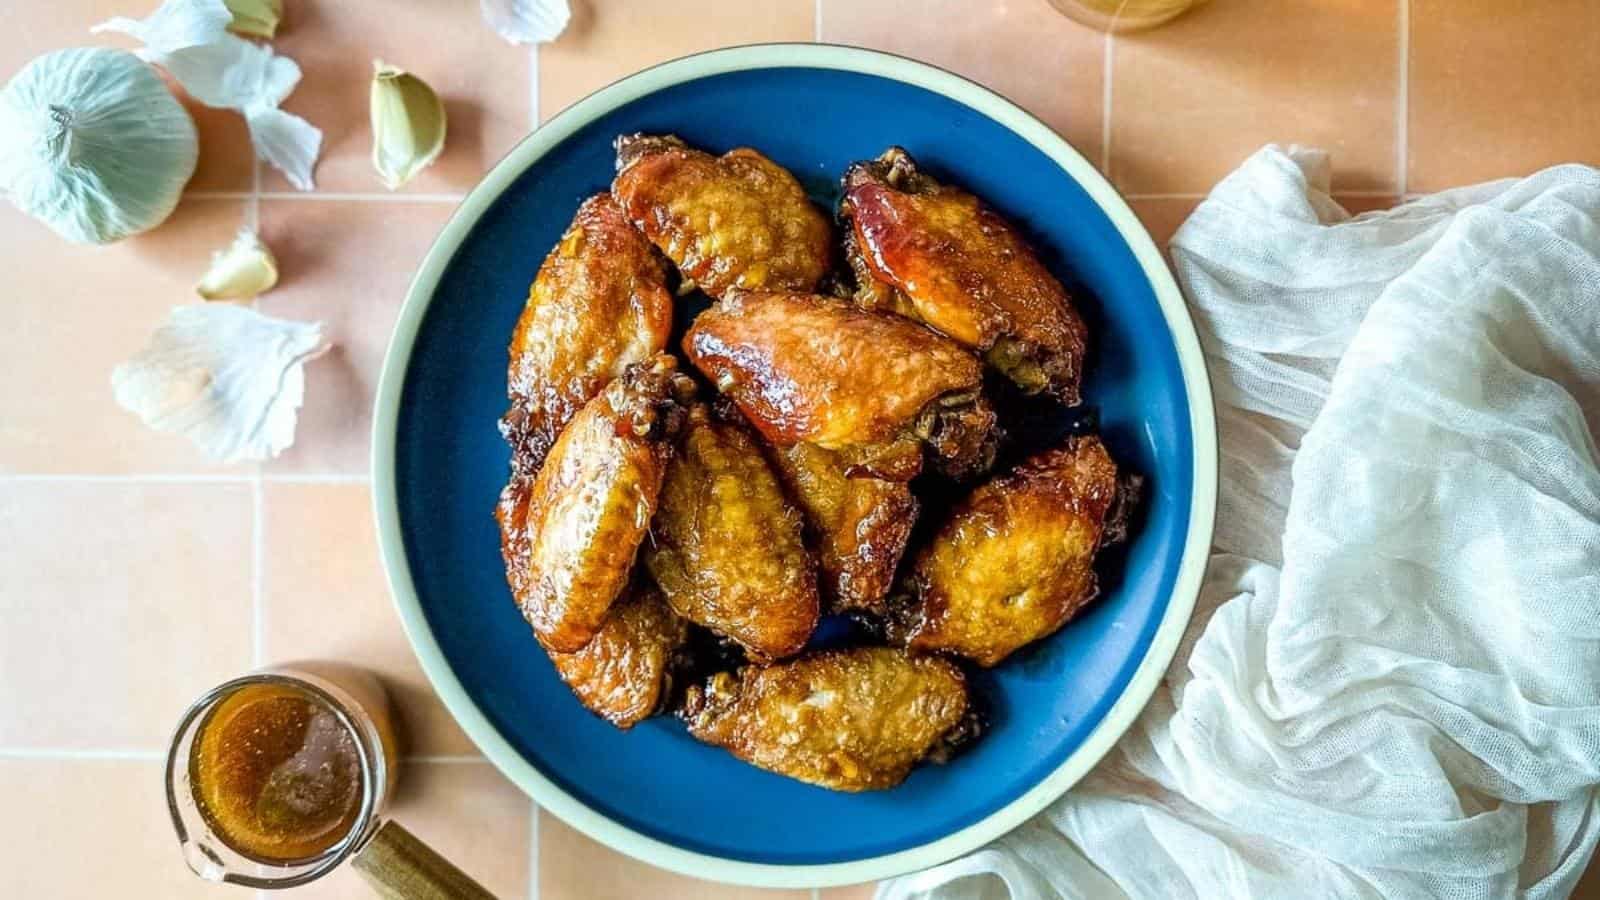 Soy garlic wings on a blue plate surrounded by a white linen, a glass of bear, soy ginger sauce, and cloves of garlic.